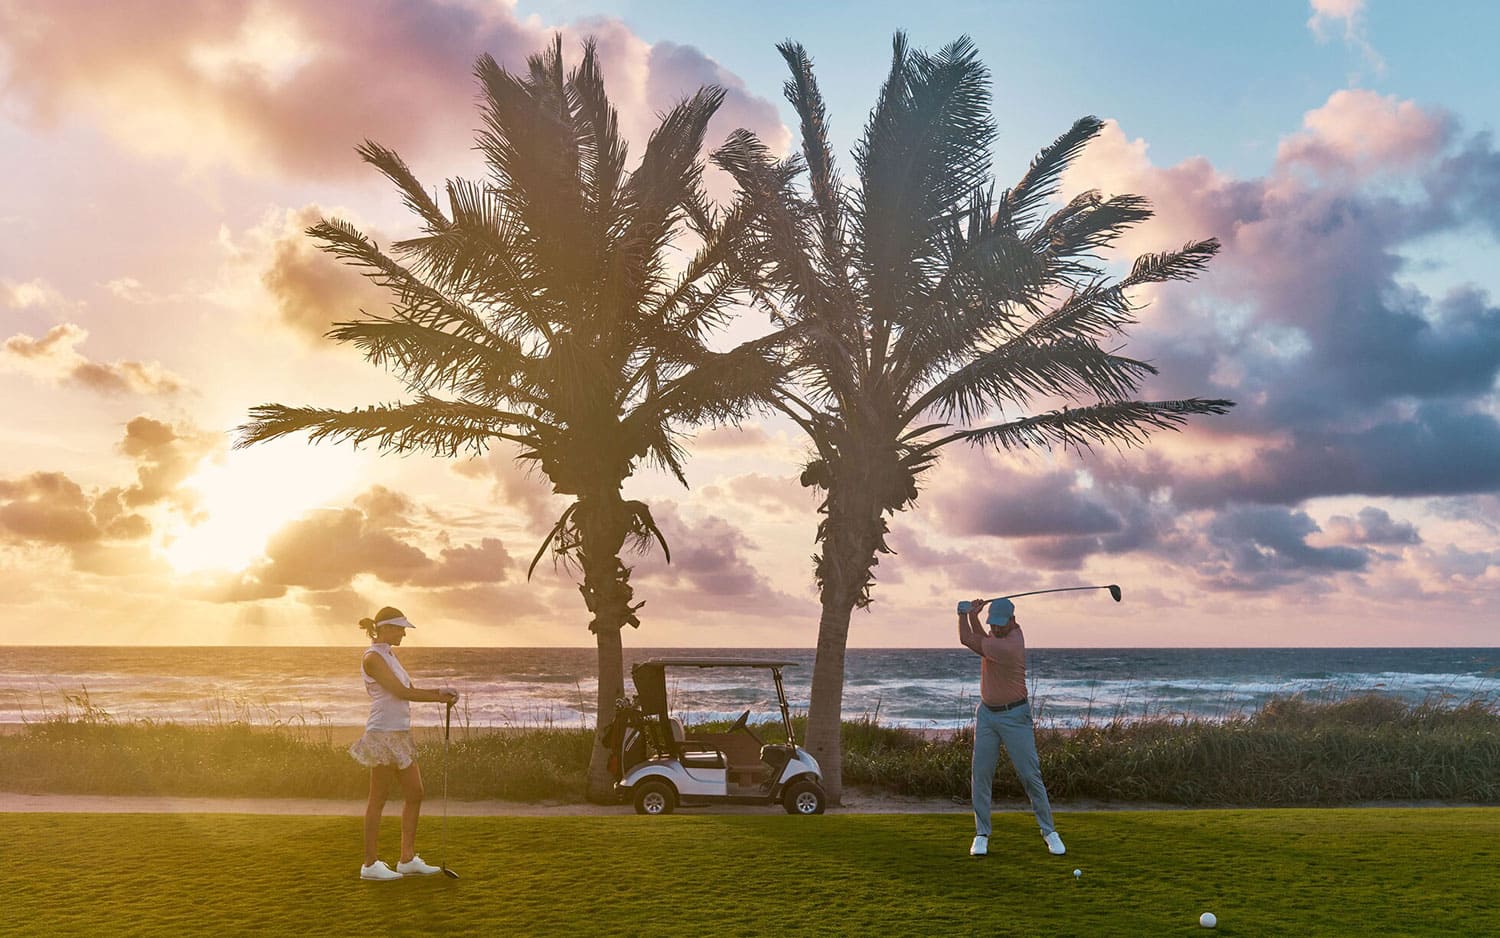 Tee for two: The Palm Beaches boast more than 160 golf courses.